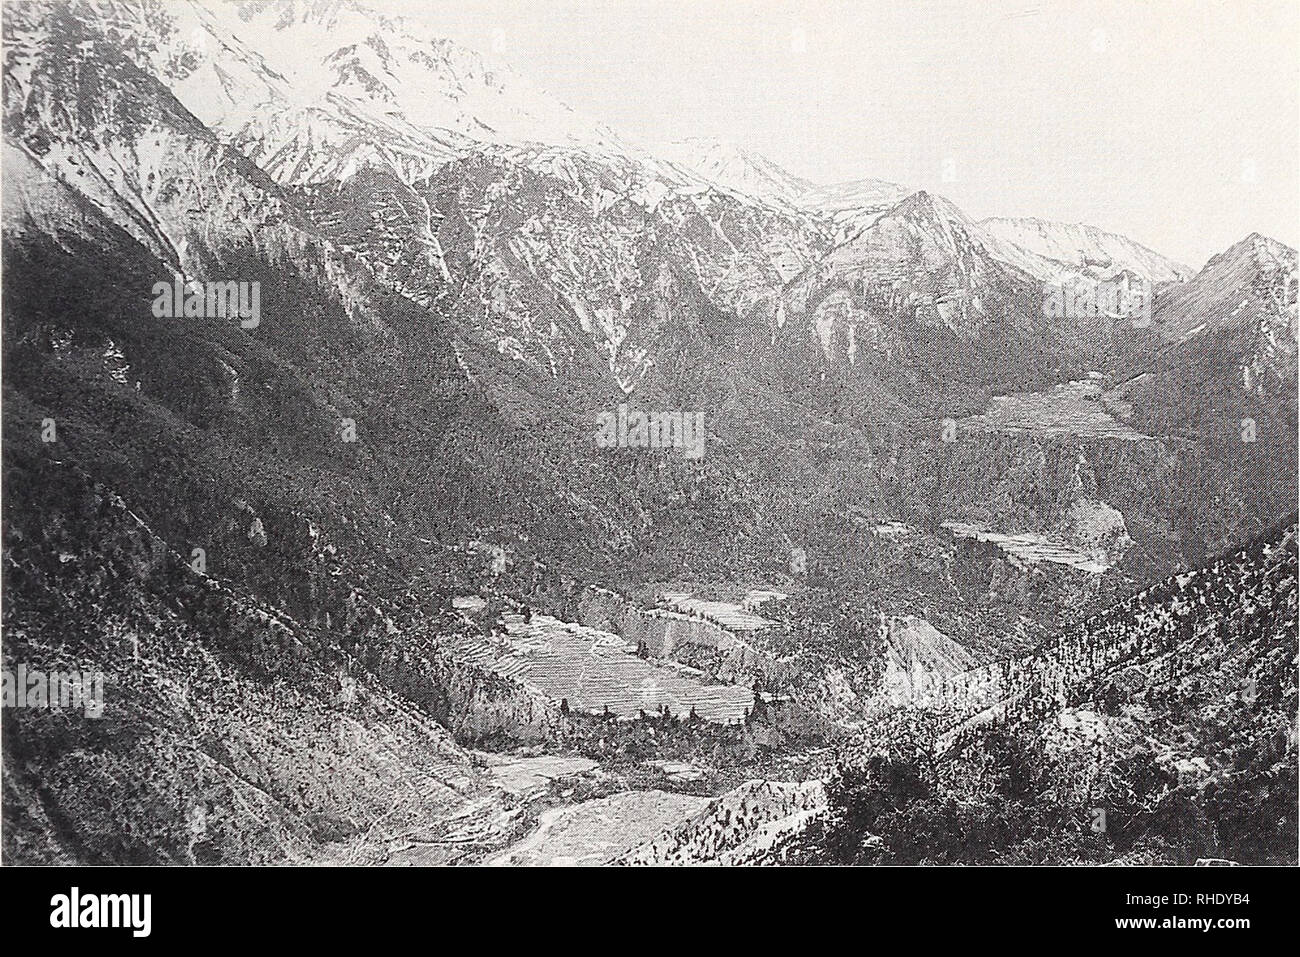 . Bonner zoologische Monographien. Zoology. 31. Fig.30: Inner Himalayas. Upper Kali Gandaki Valley, looking SE from above Marpha, mesophilic co- niferous forests (Pinus wallichiana, Abies spectabilis, locally Picea smithiana and Jimiperus; Betula utilis near the treeline). Deforested triangle near the right margin is the forest clearing Thaksang abo- ve Tukche, cf. Fig.31; (3150 m at lower edge), Mustang Distr., Ill 1974 J. Martens. cipitation because of their protected position within the mountain chain. On the shaded slo- pes and in gorges grow Abies and Picea, trees of moderately wet region Stock Photo